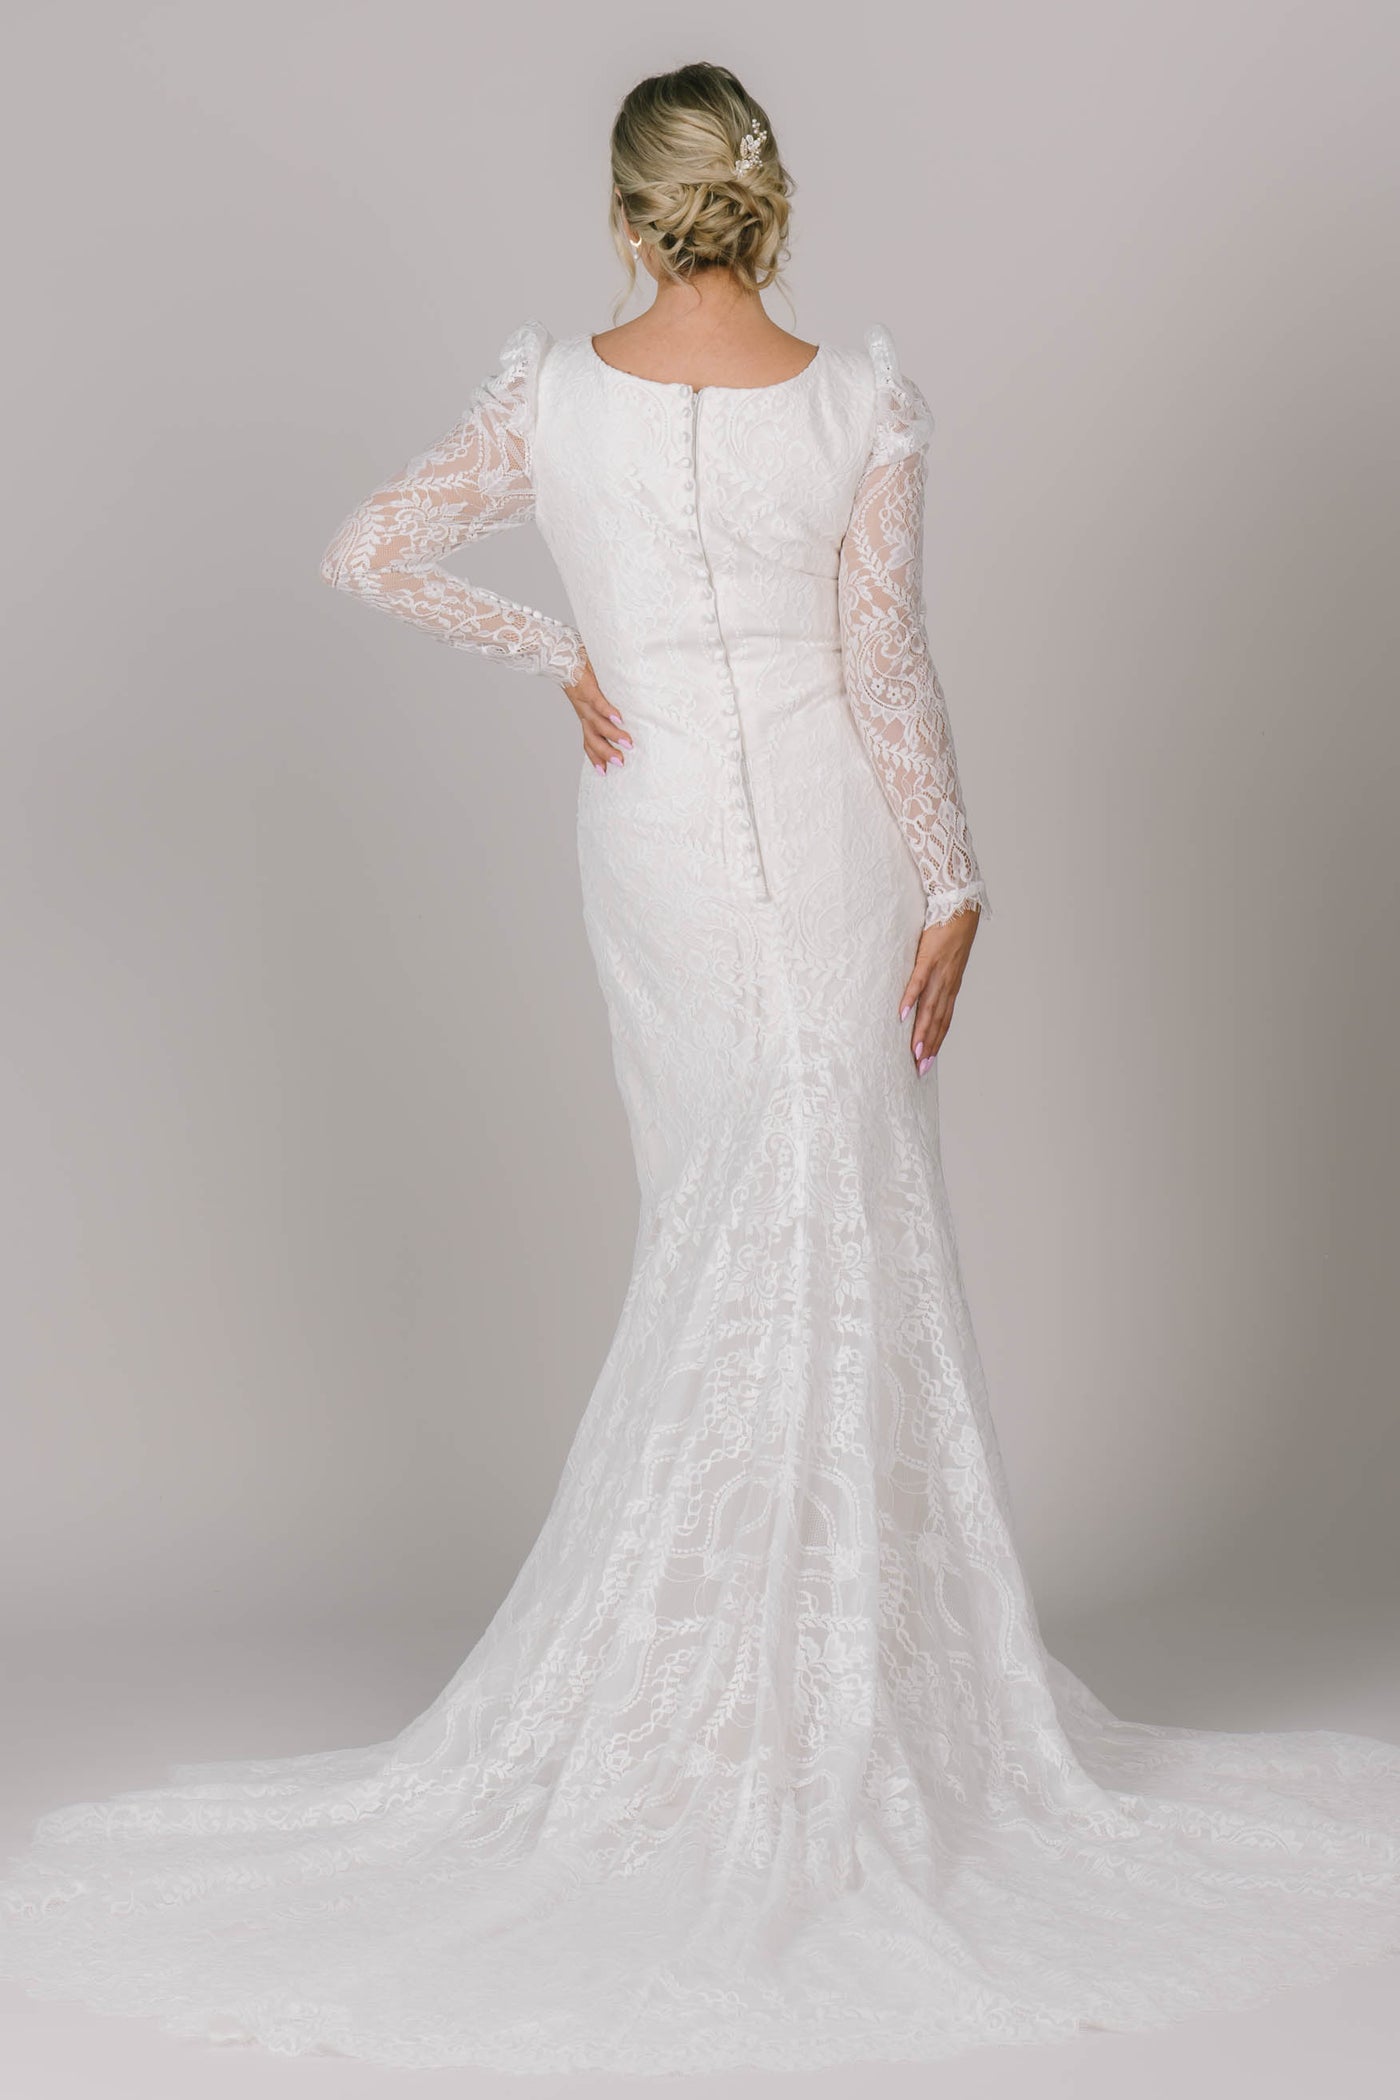 A back angle of this fitted modest wedding dress that is covered in lace, has buttons down the back, and has the most stunning train!